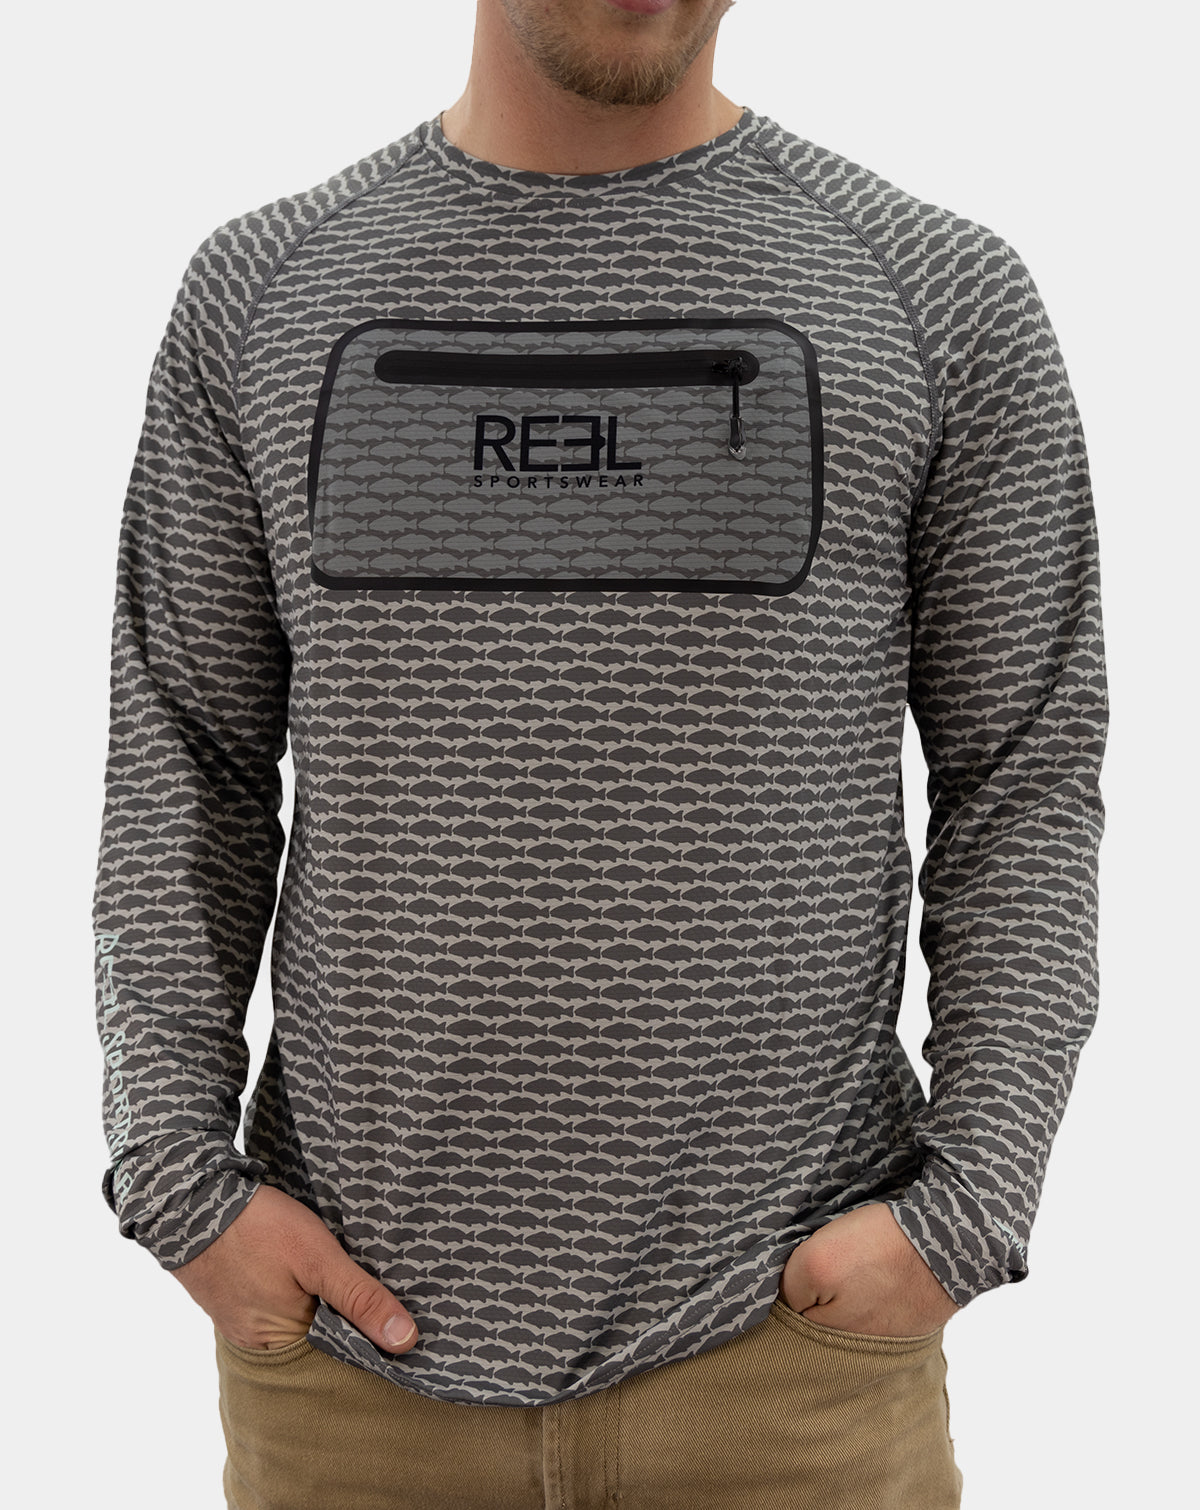 Rojo Men's Pro+ Technical performance Fishing Long Sleeve with front terminal Zipper pocket